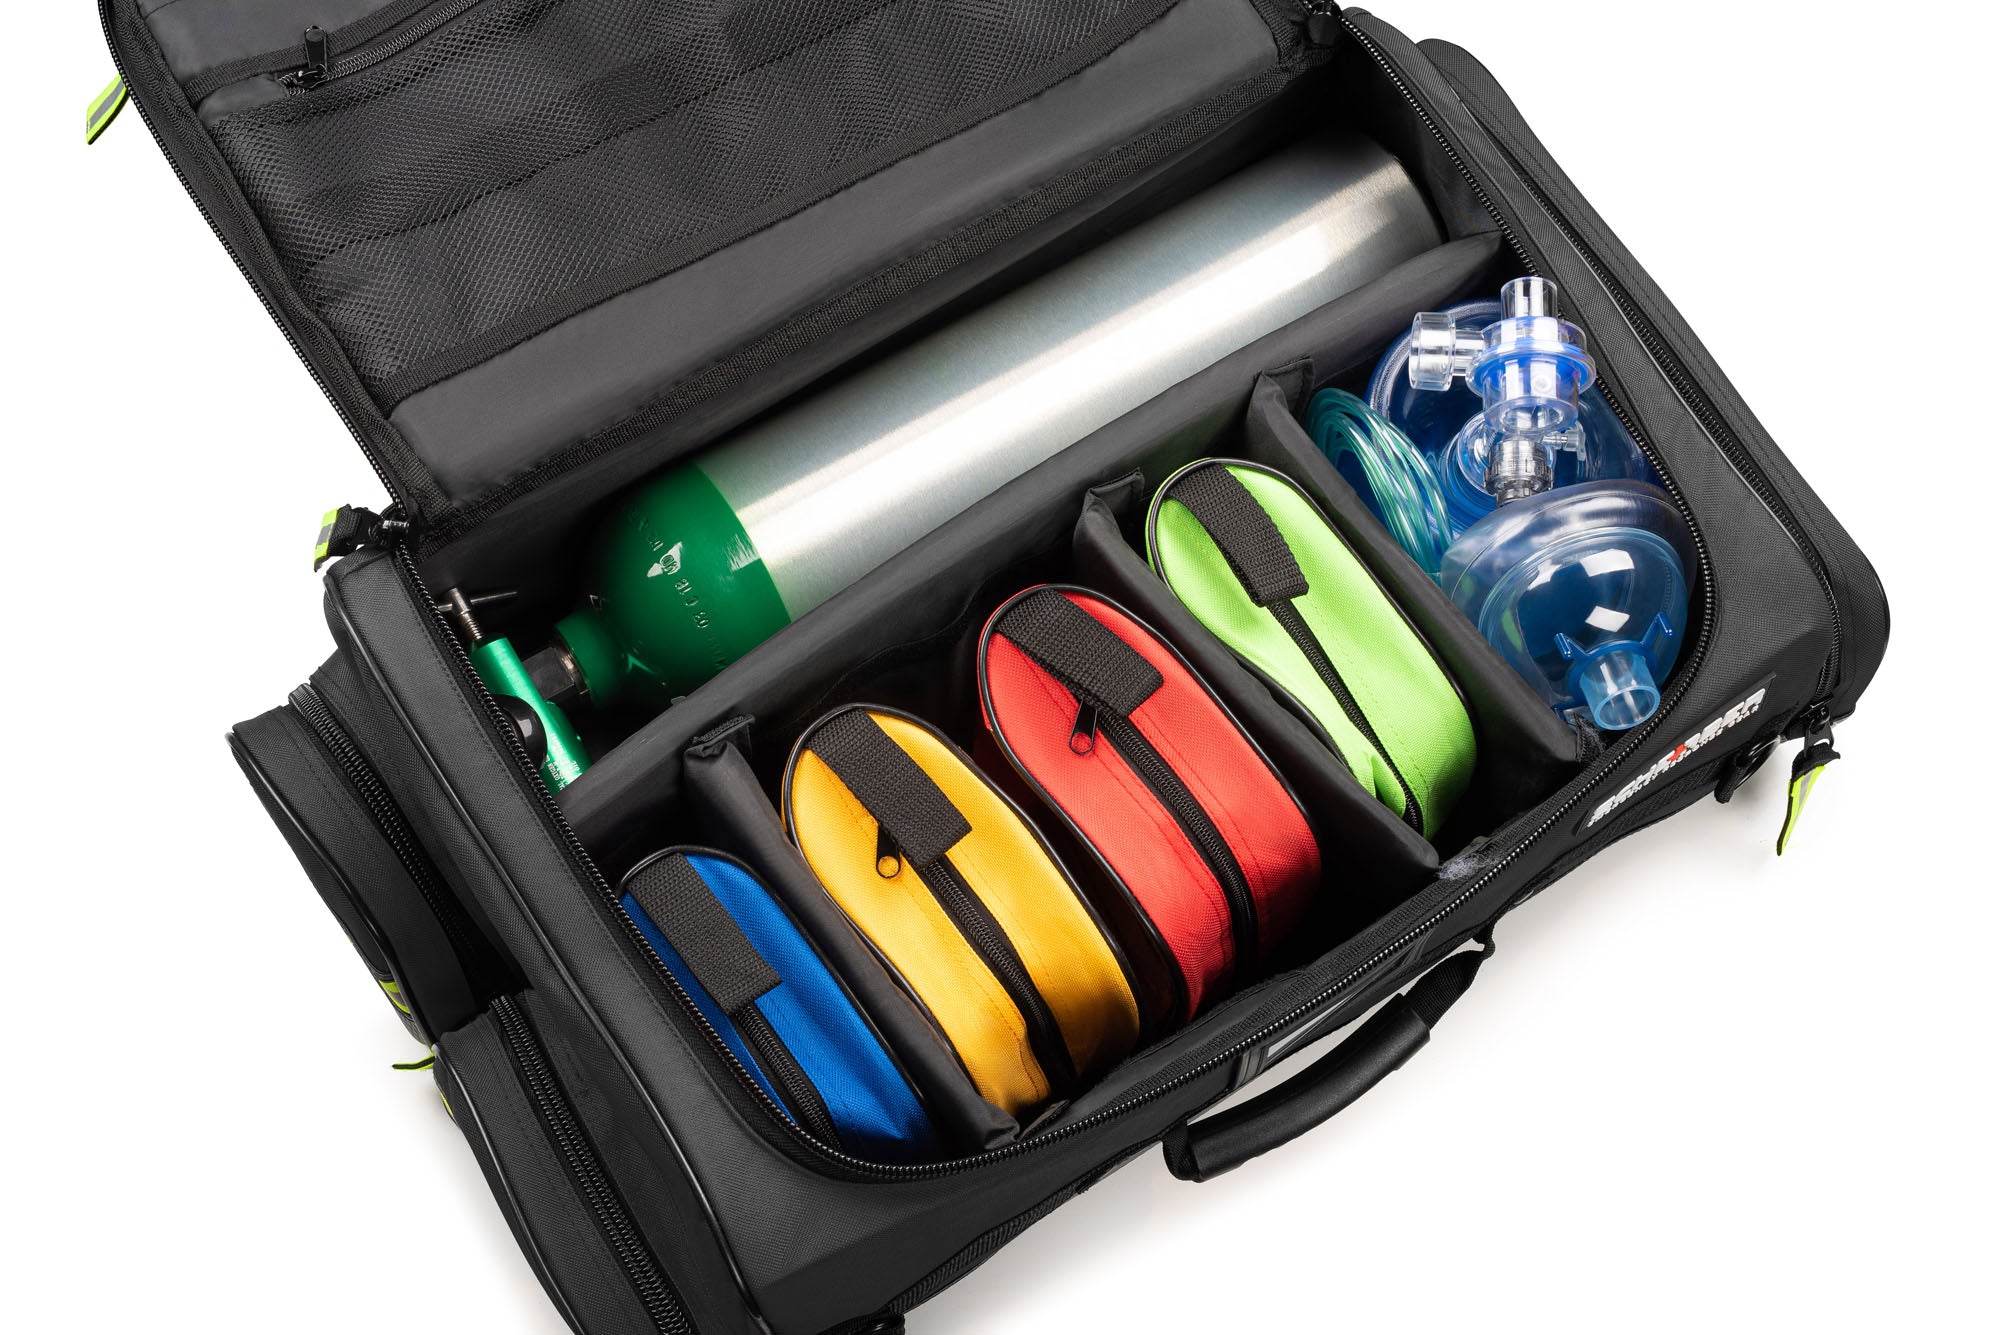 Scherber Fully Stocked First Responder Ultimate Professional EMT/EMS Trauma Kit | HSA/FSA Approved | w/10+ Compartments, Zippered Pockets, Dividers